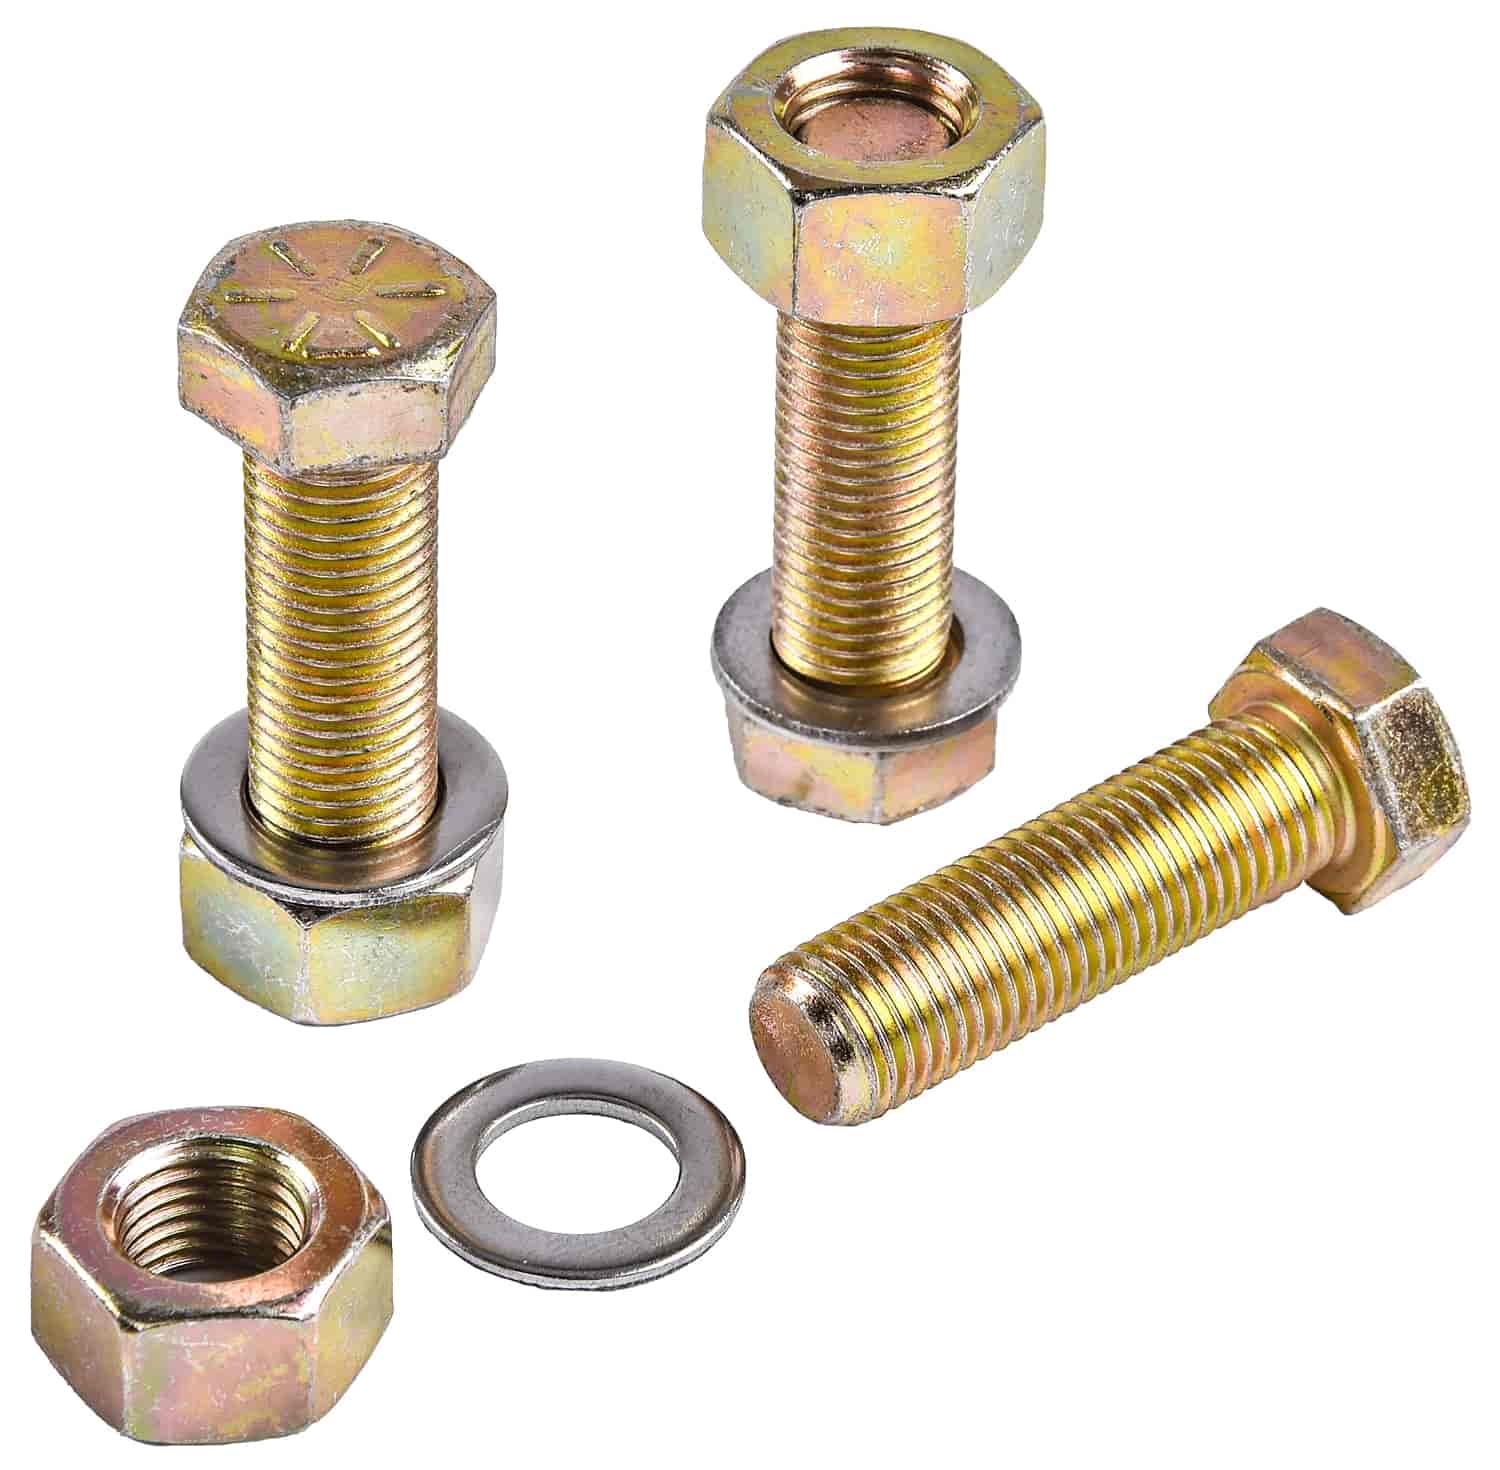 TTorque Converter Bolts For 8 in. Diameter Race Converters [7/16 in.-20 x 1 1/2 in. UHL]